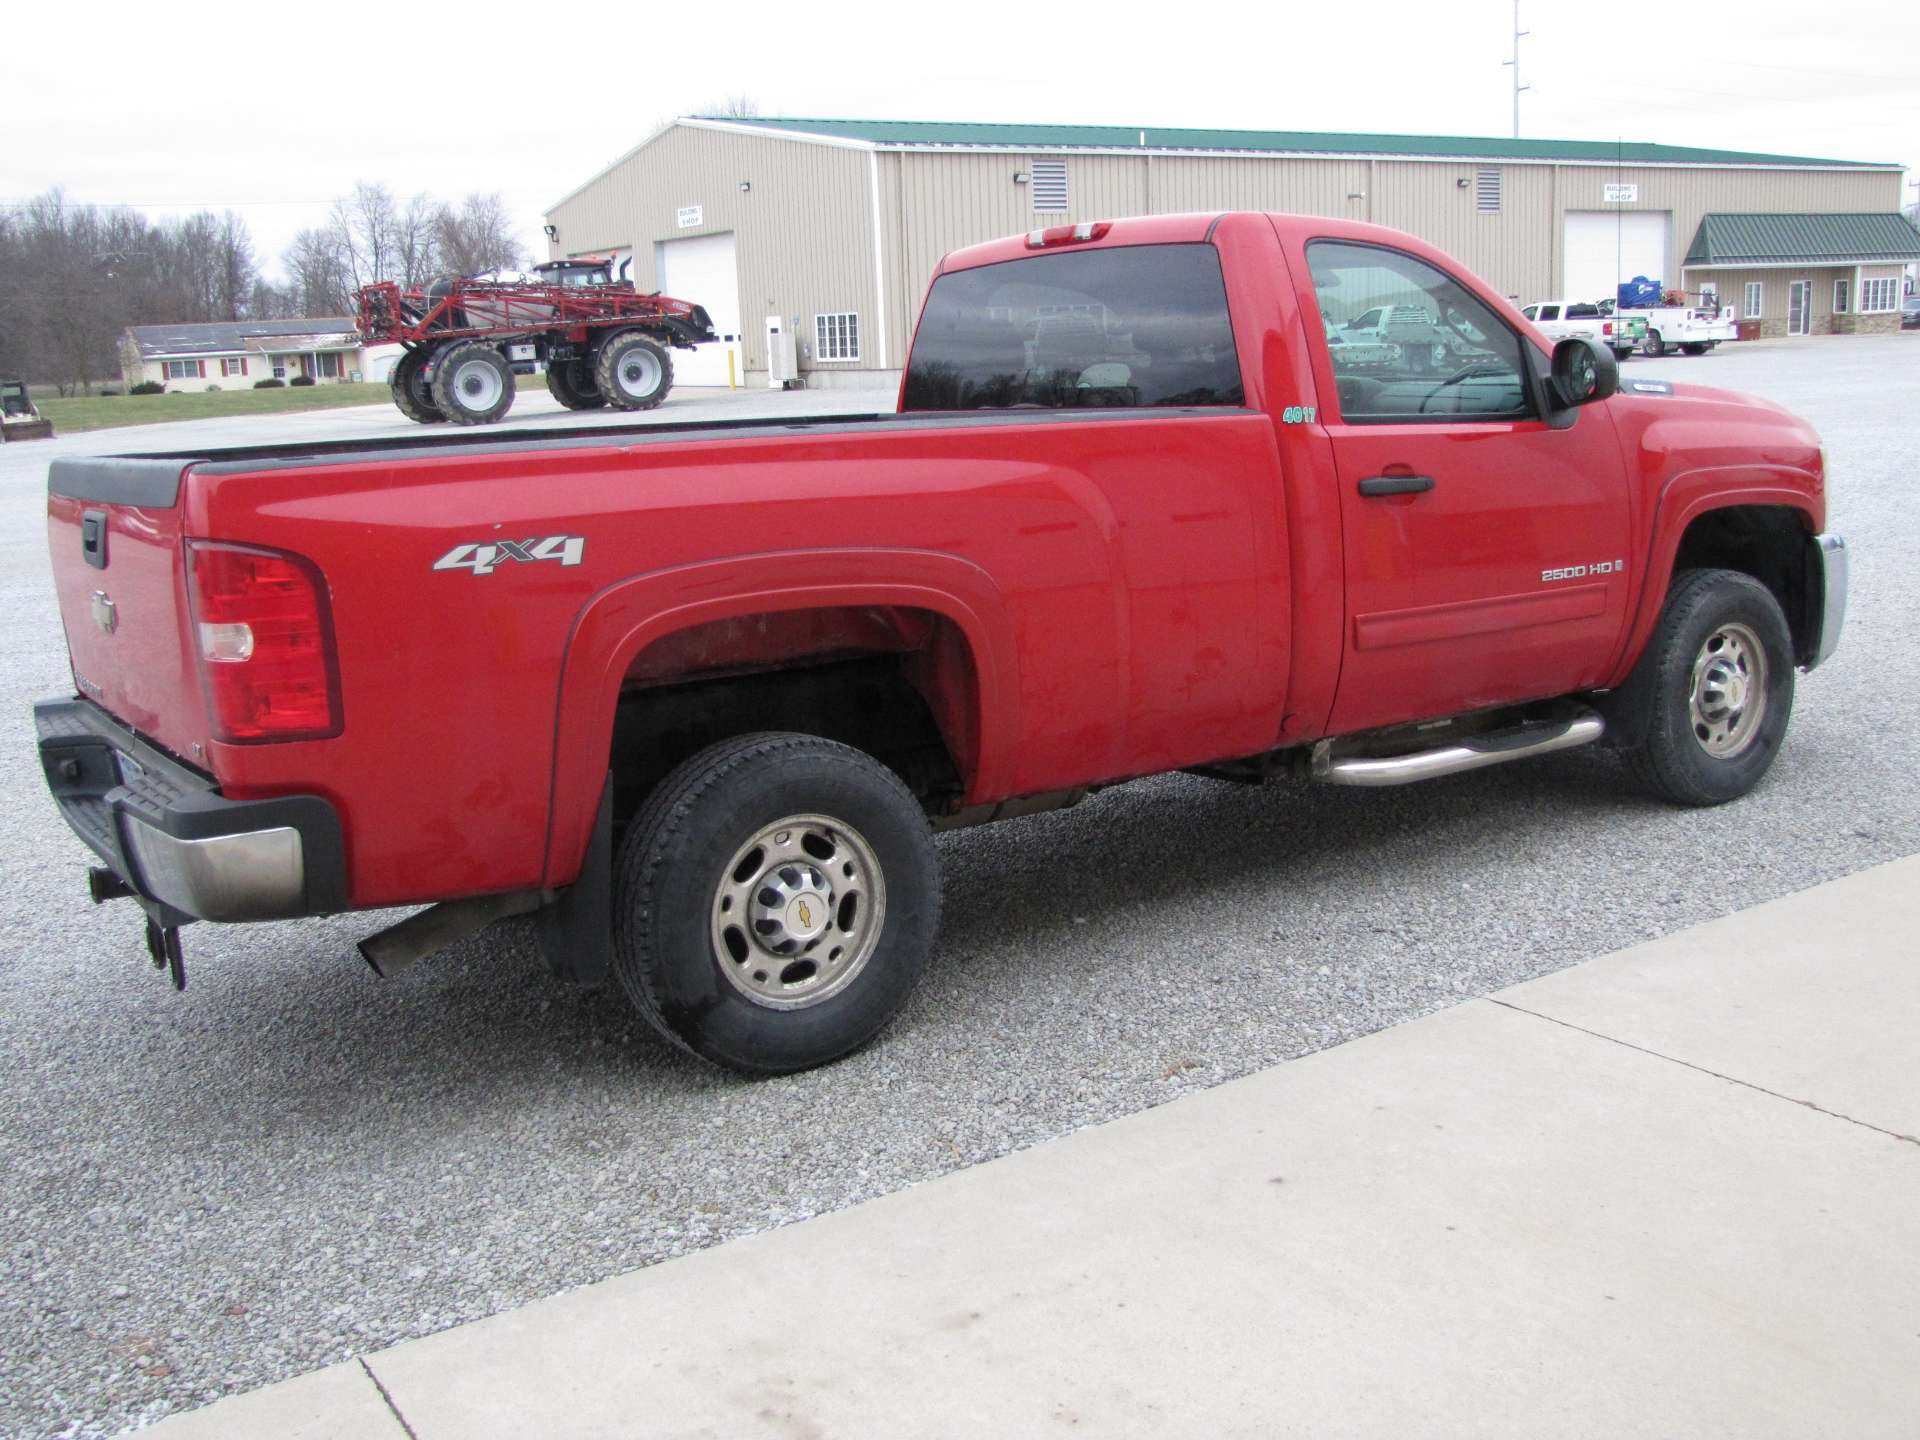 2009 Chevy 2500 HD LT pickup truck - Image 12 of 69